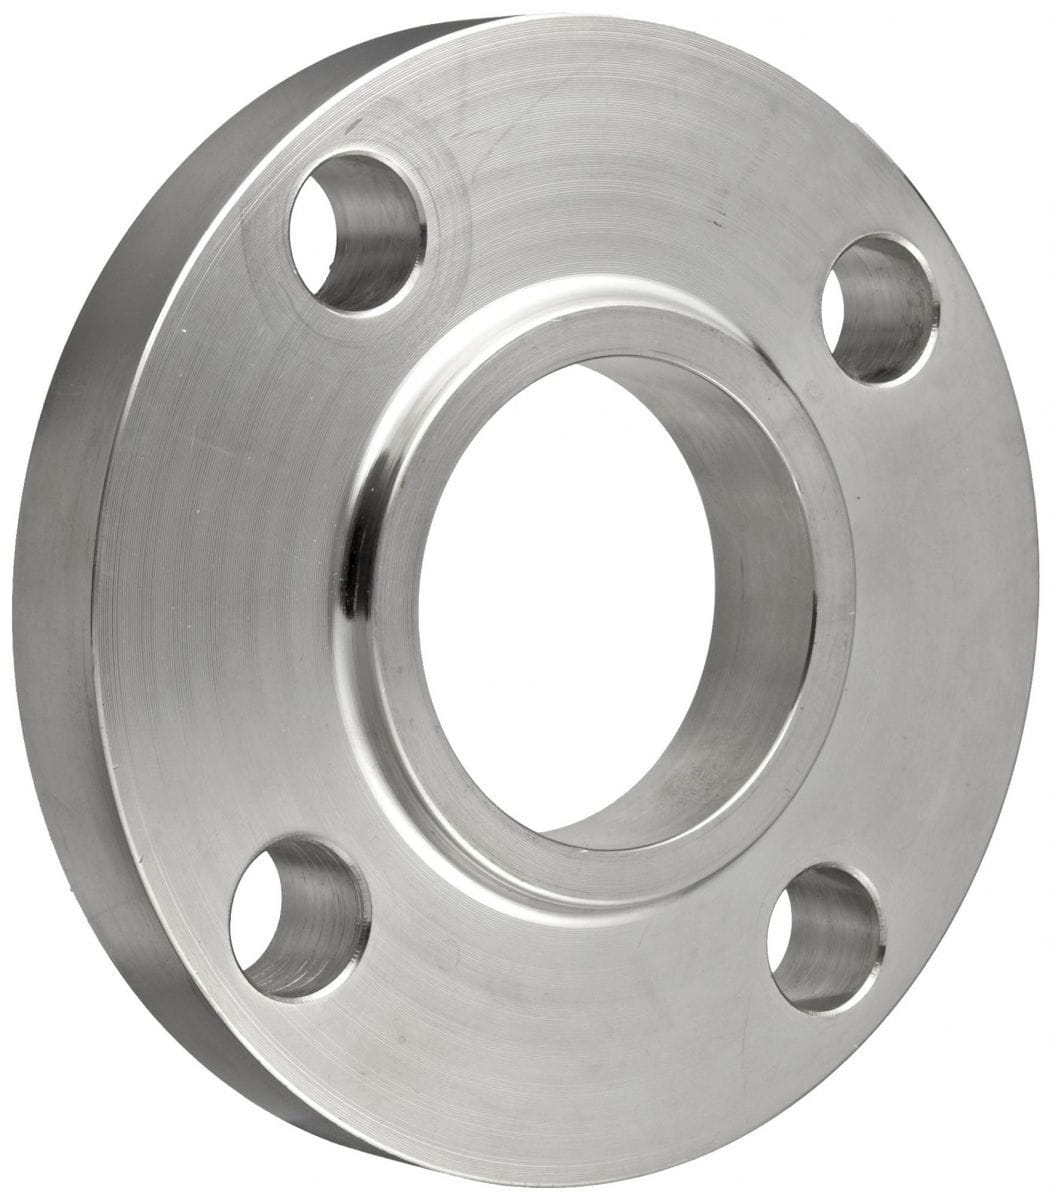 ASME B16.47  Forged Class250 Lap Joint Flange